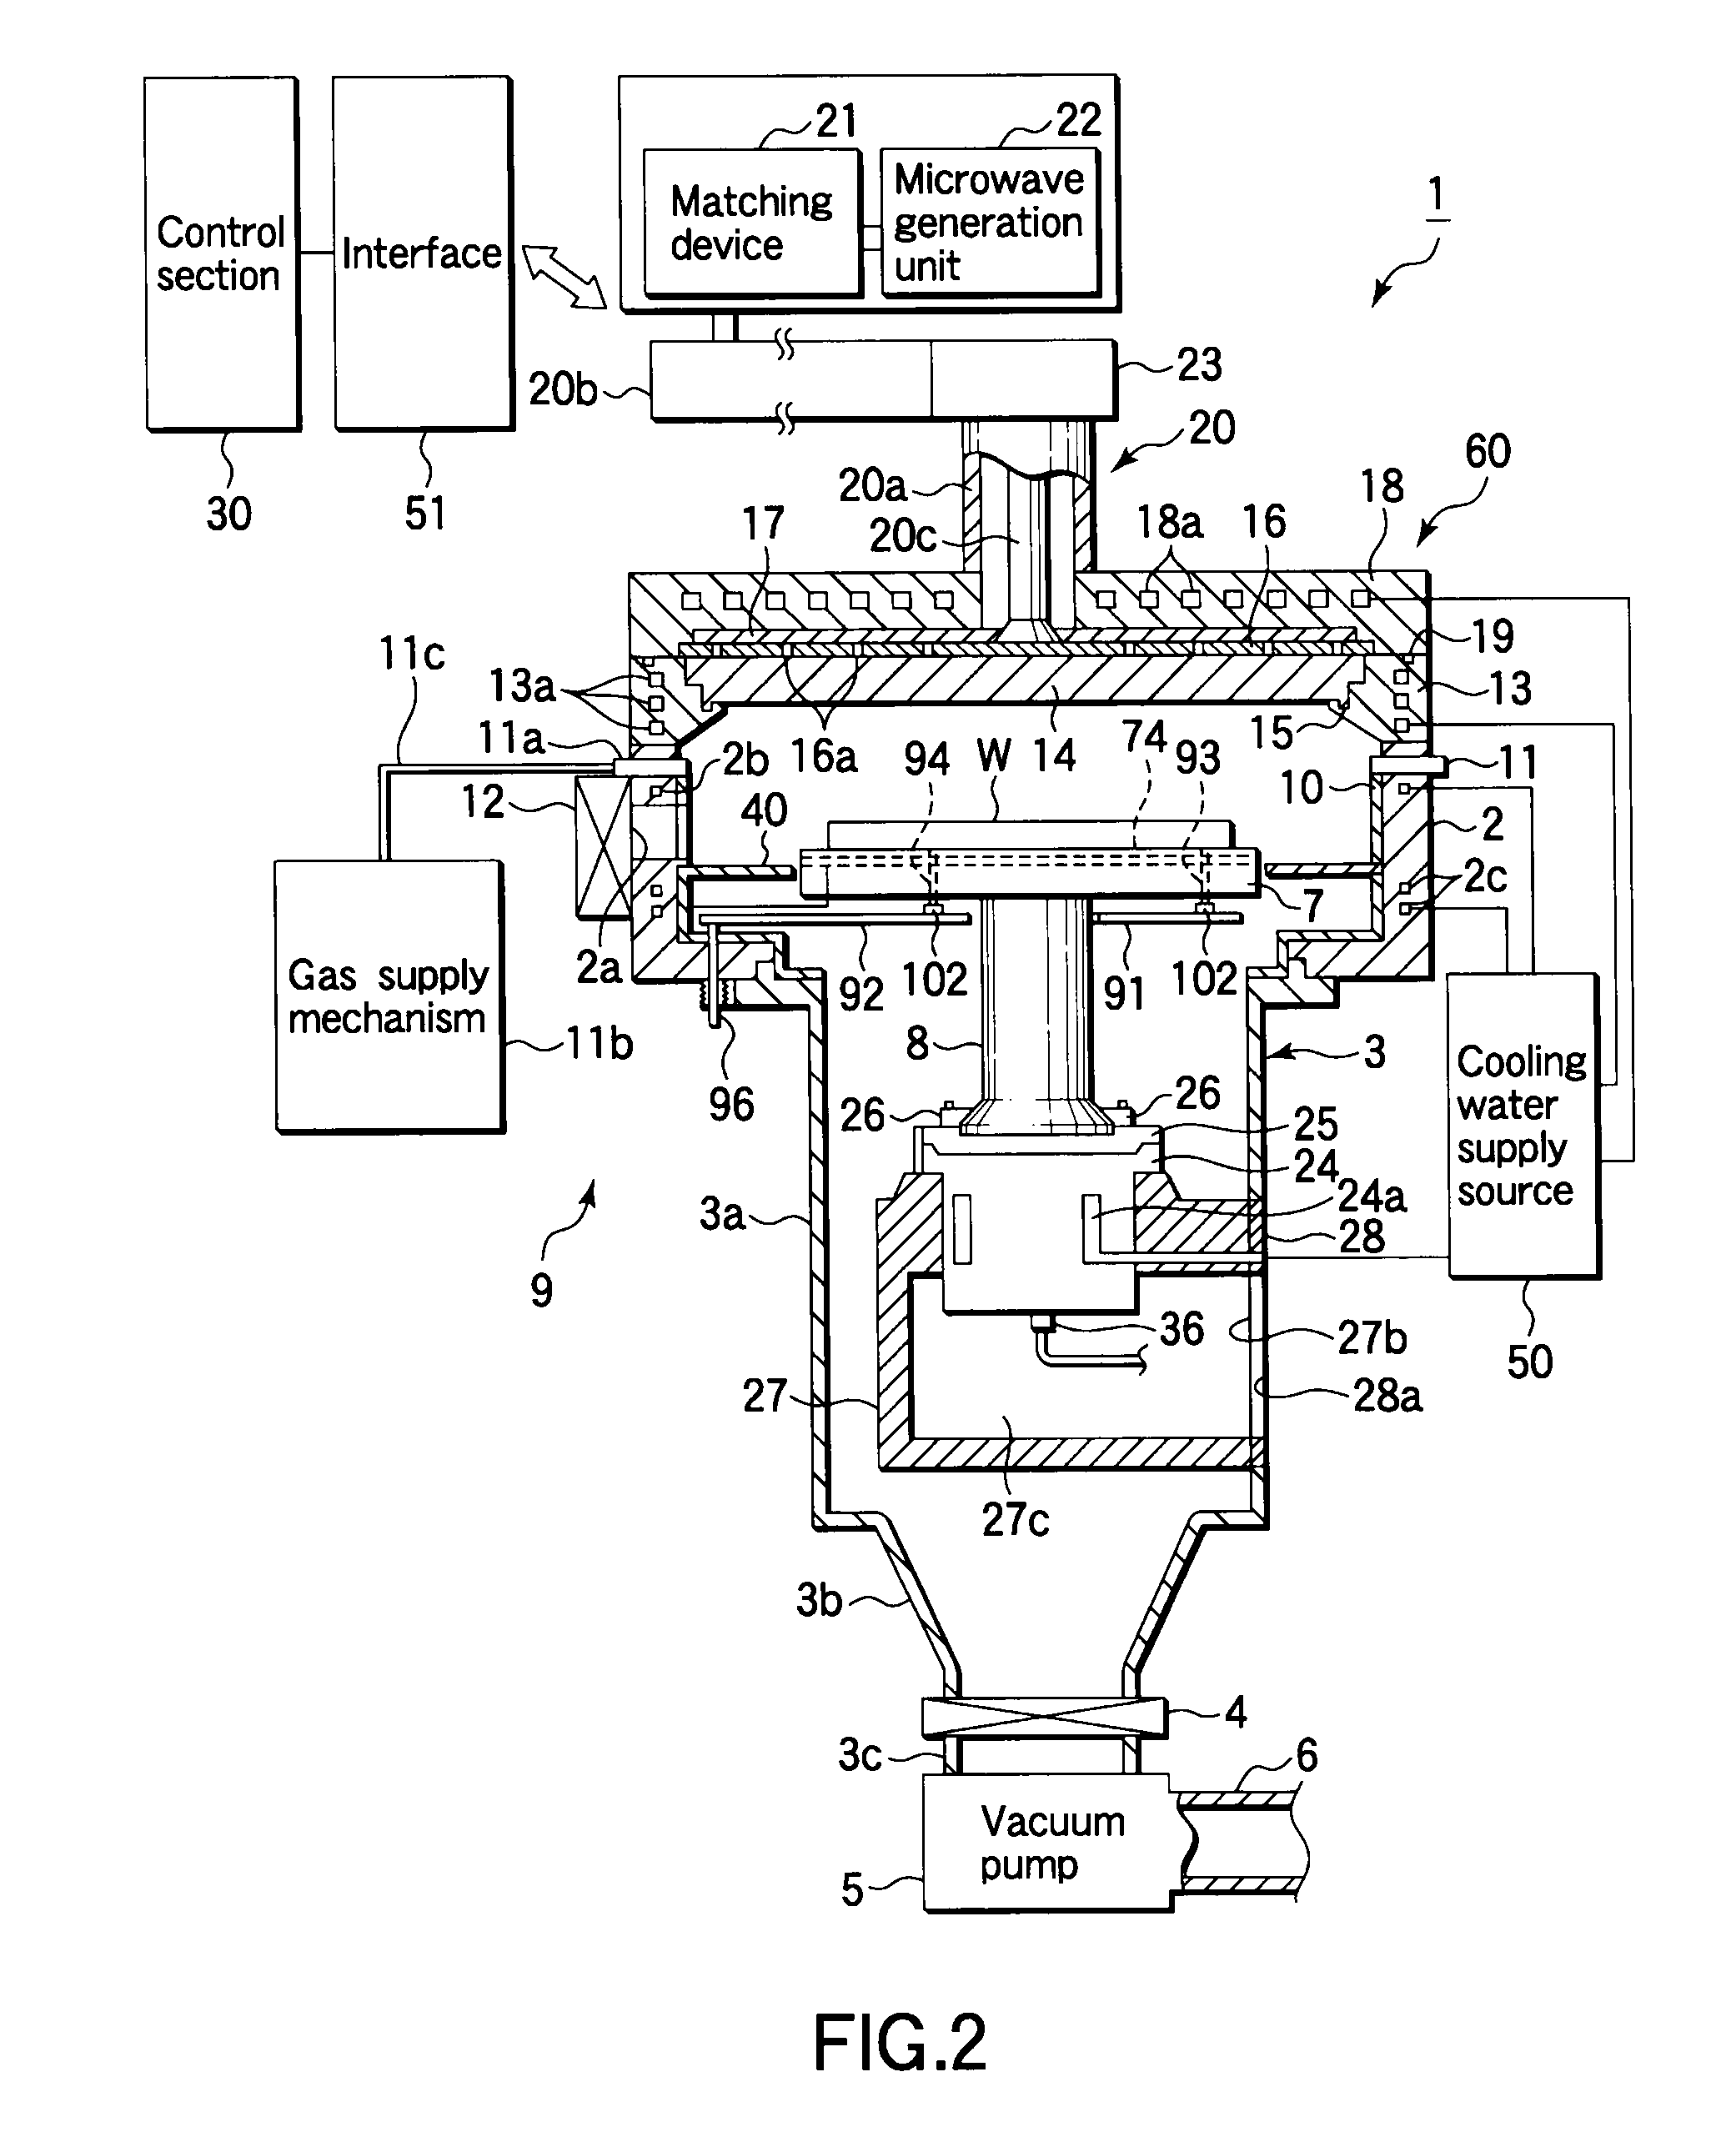 Plasma treatment apparatus, and substrate heating mechanism to be used in the apparatus